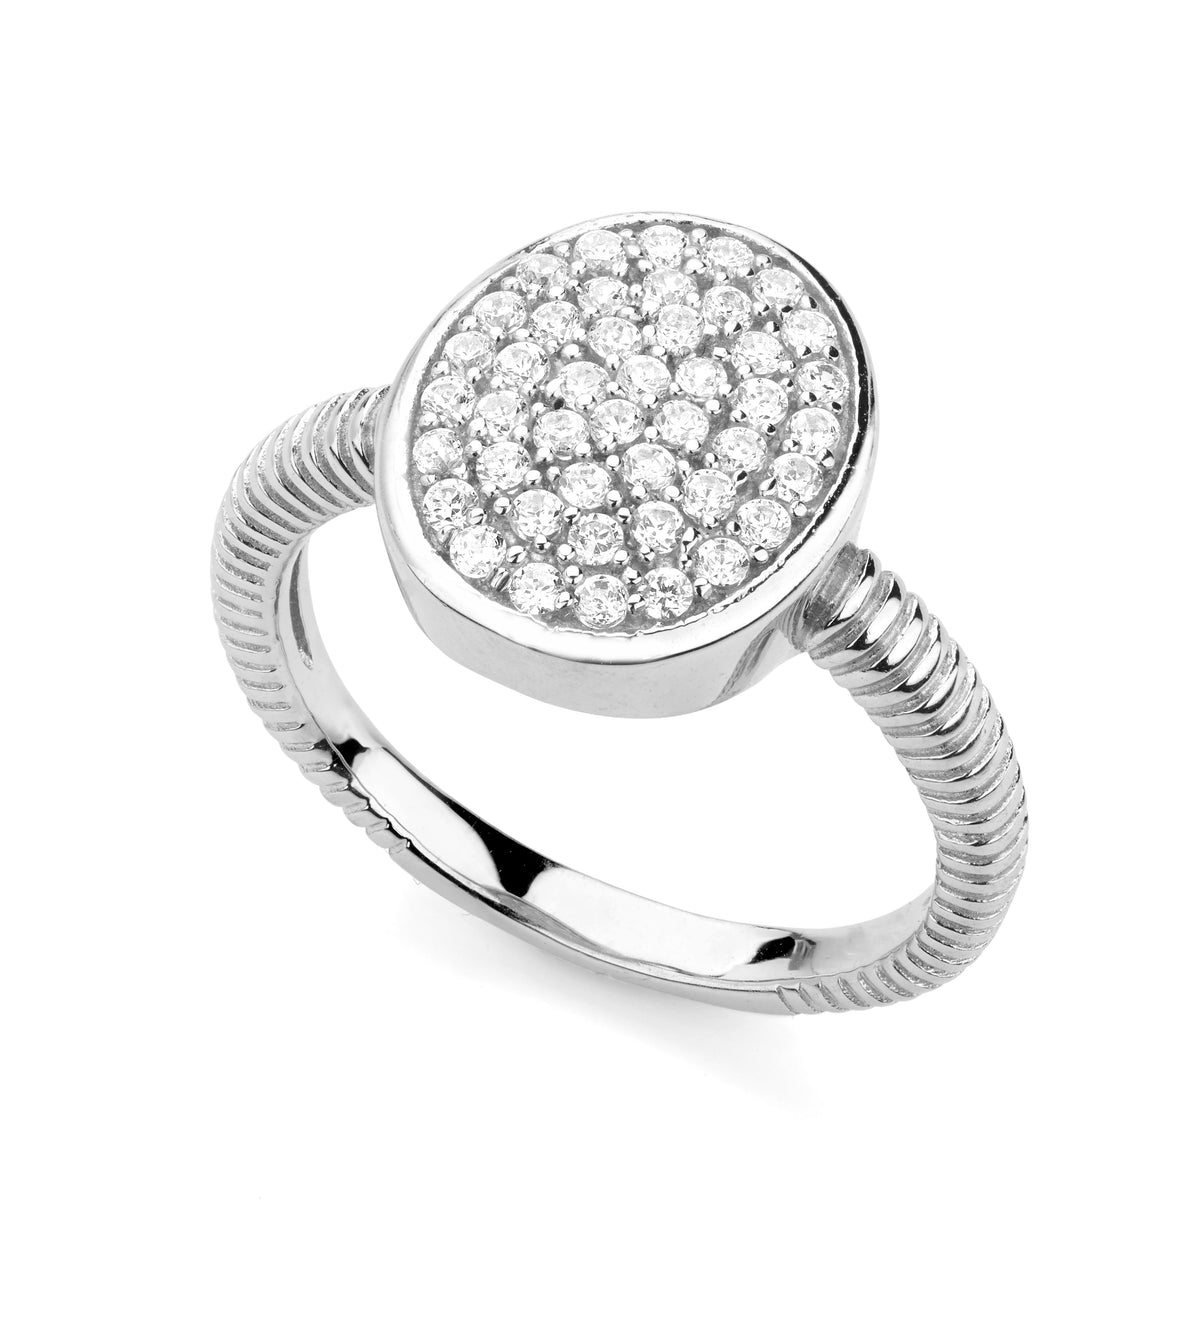 Oval Micro Pave Ring in White